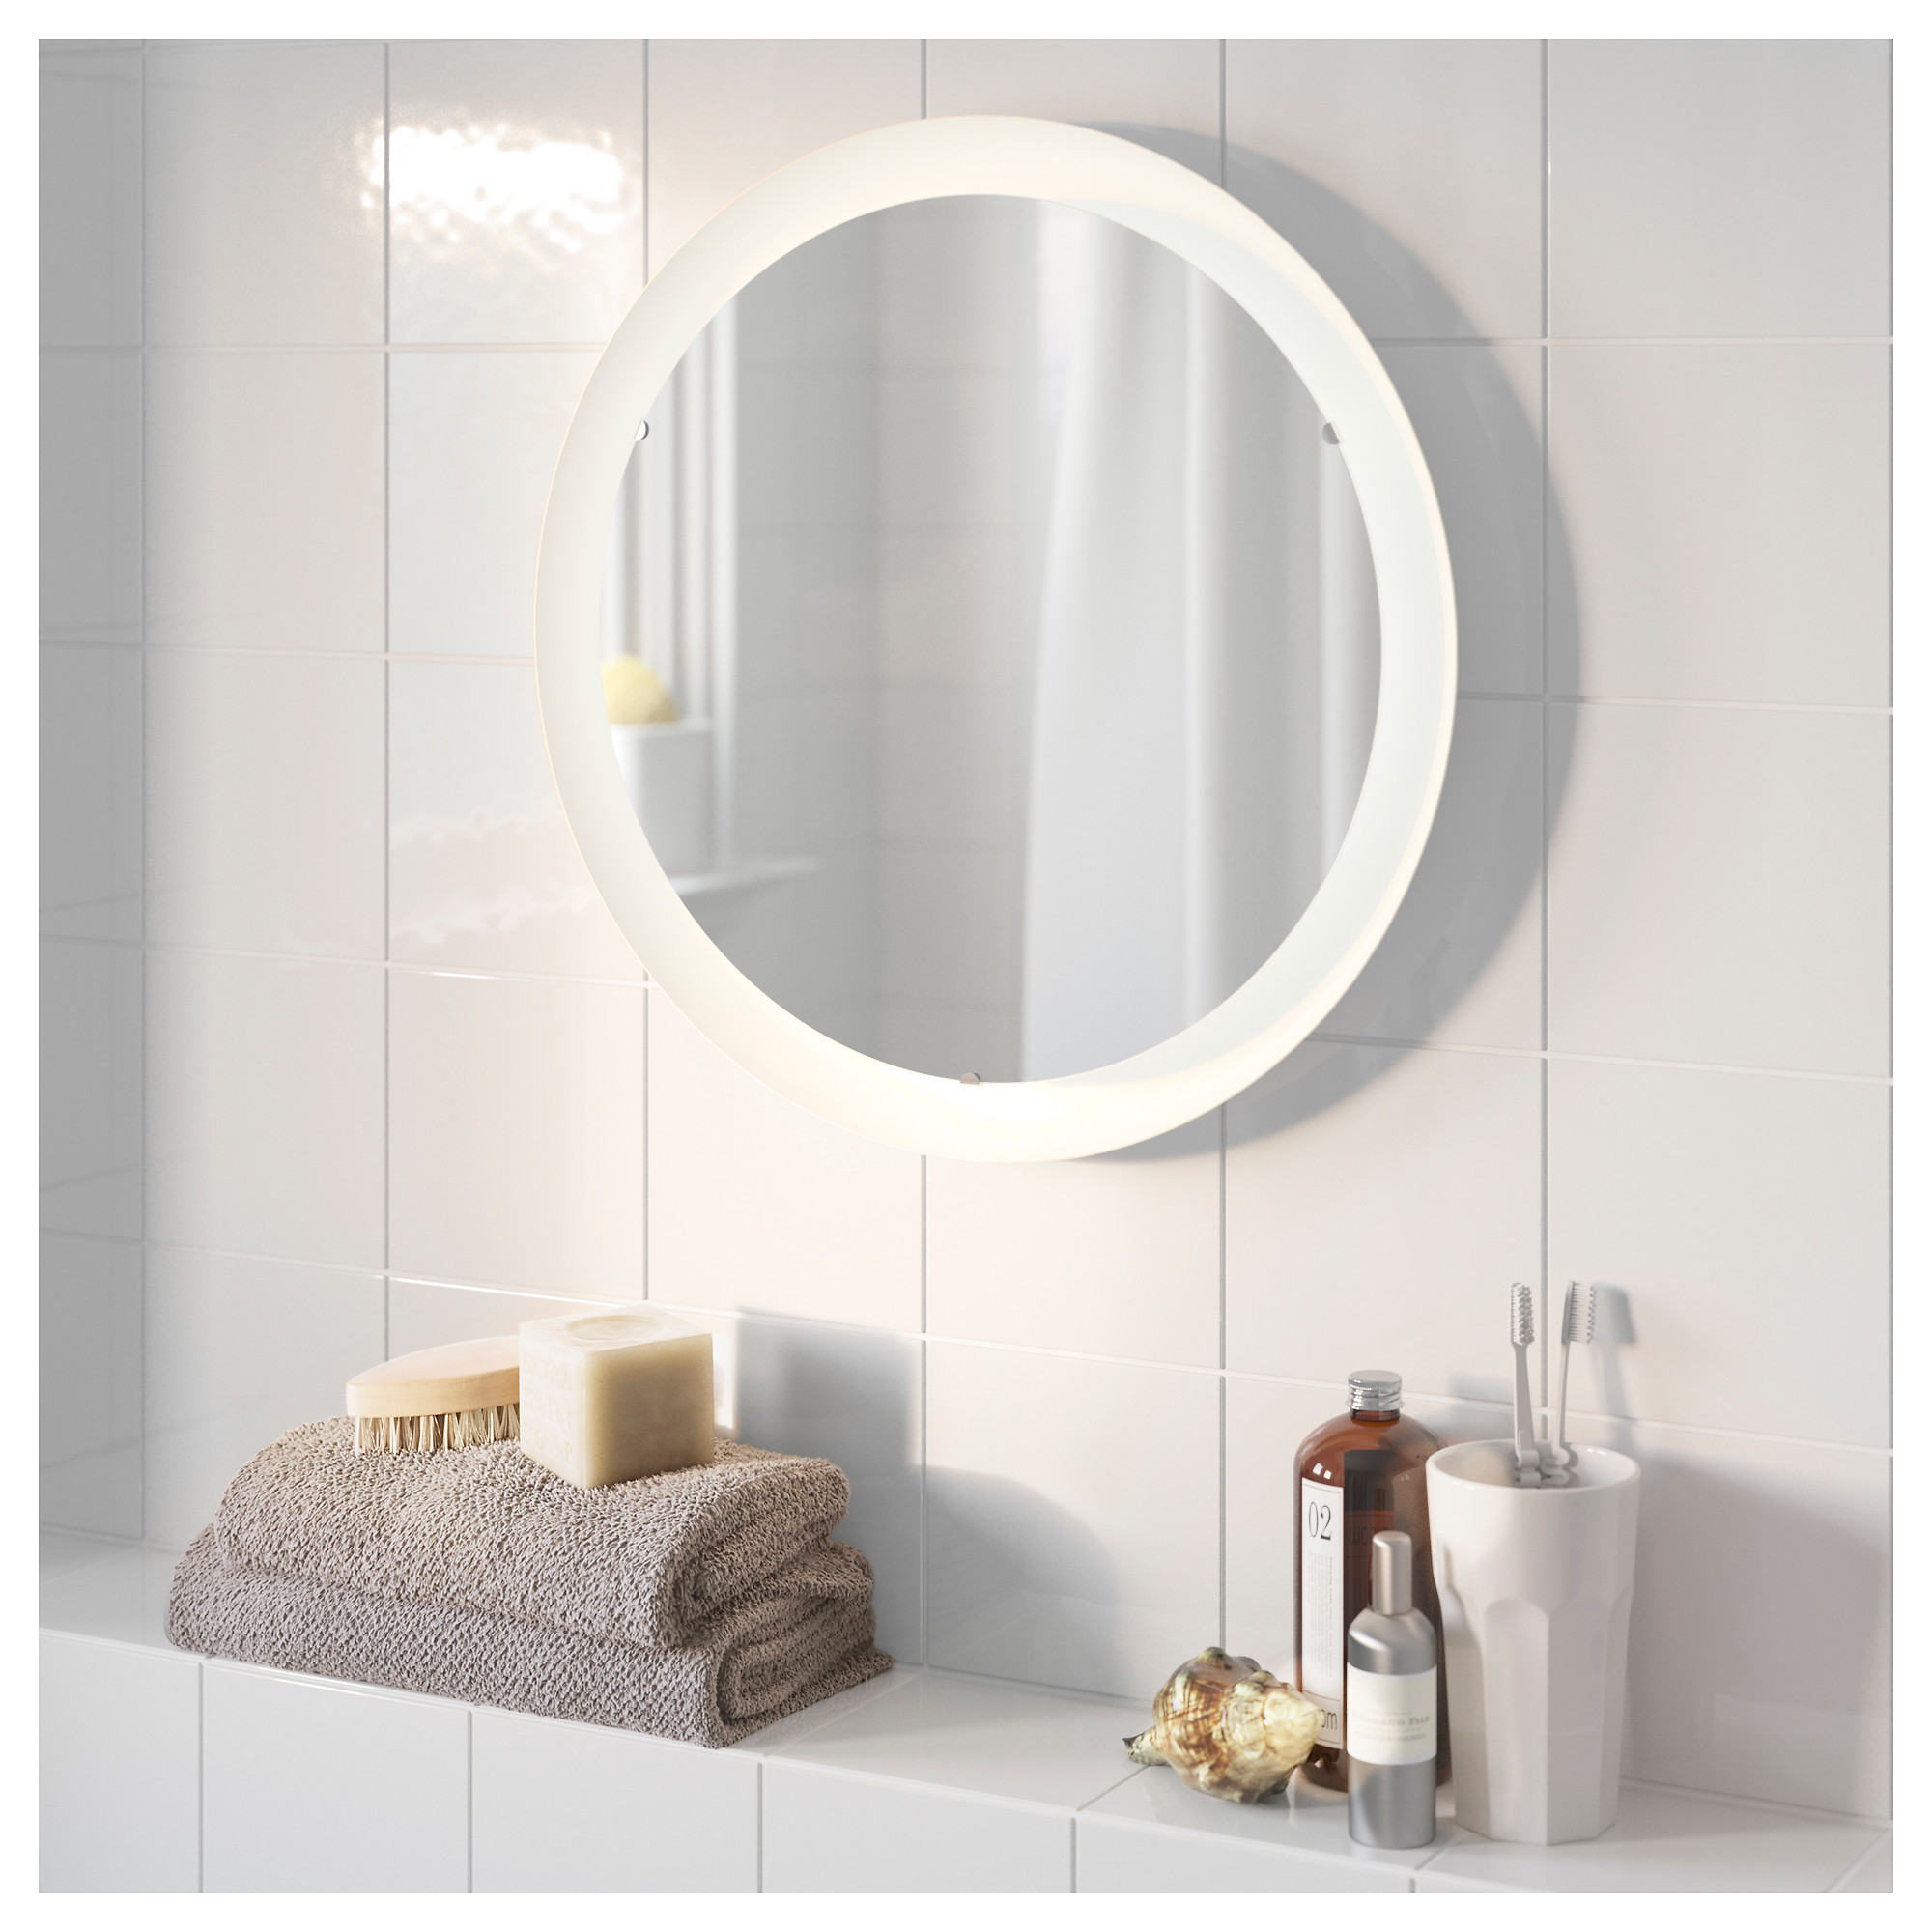 STORJORM - mirror with integrated lighting, white | IKEA ...